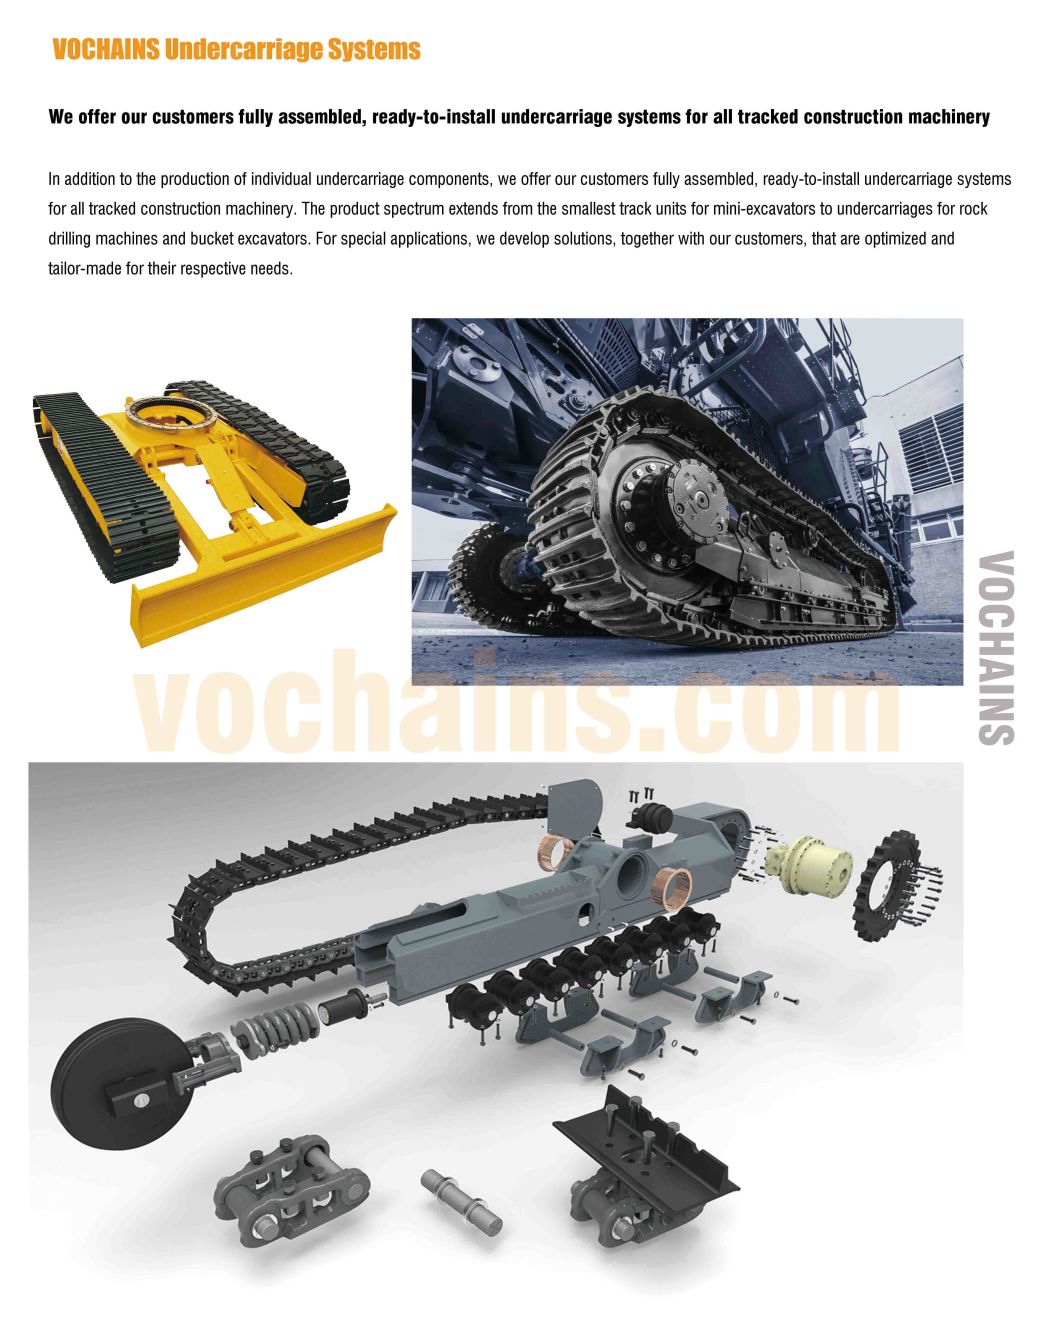 Rubber Track Crawler Undercarriage Rubber Tracks Frame Manufacturer Custom for Forest and Logging